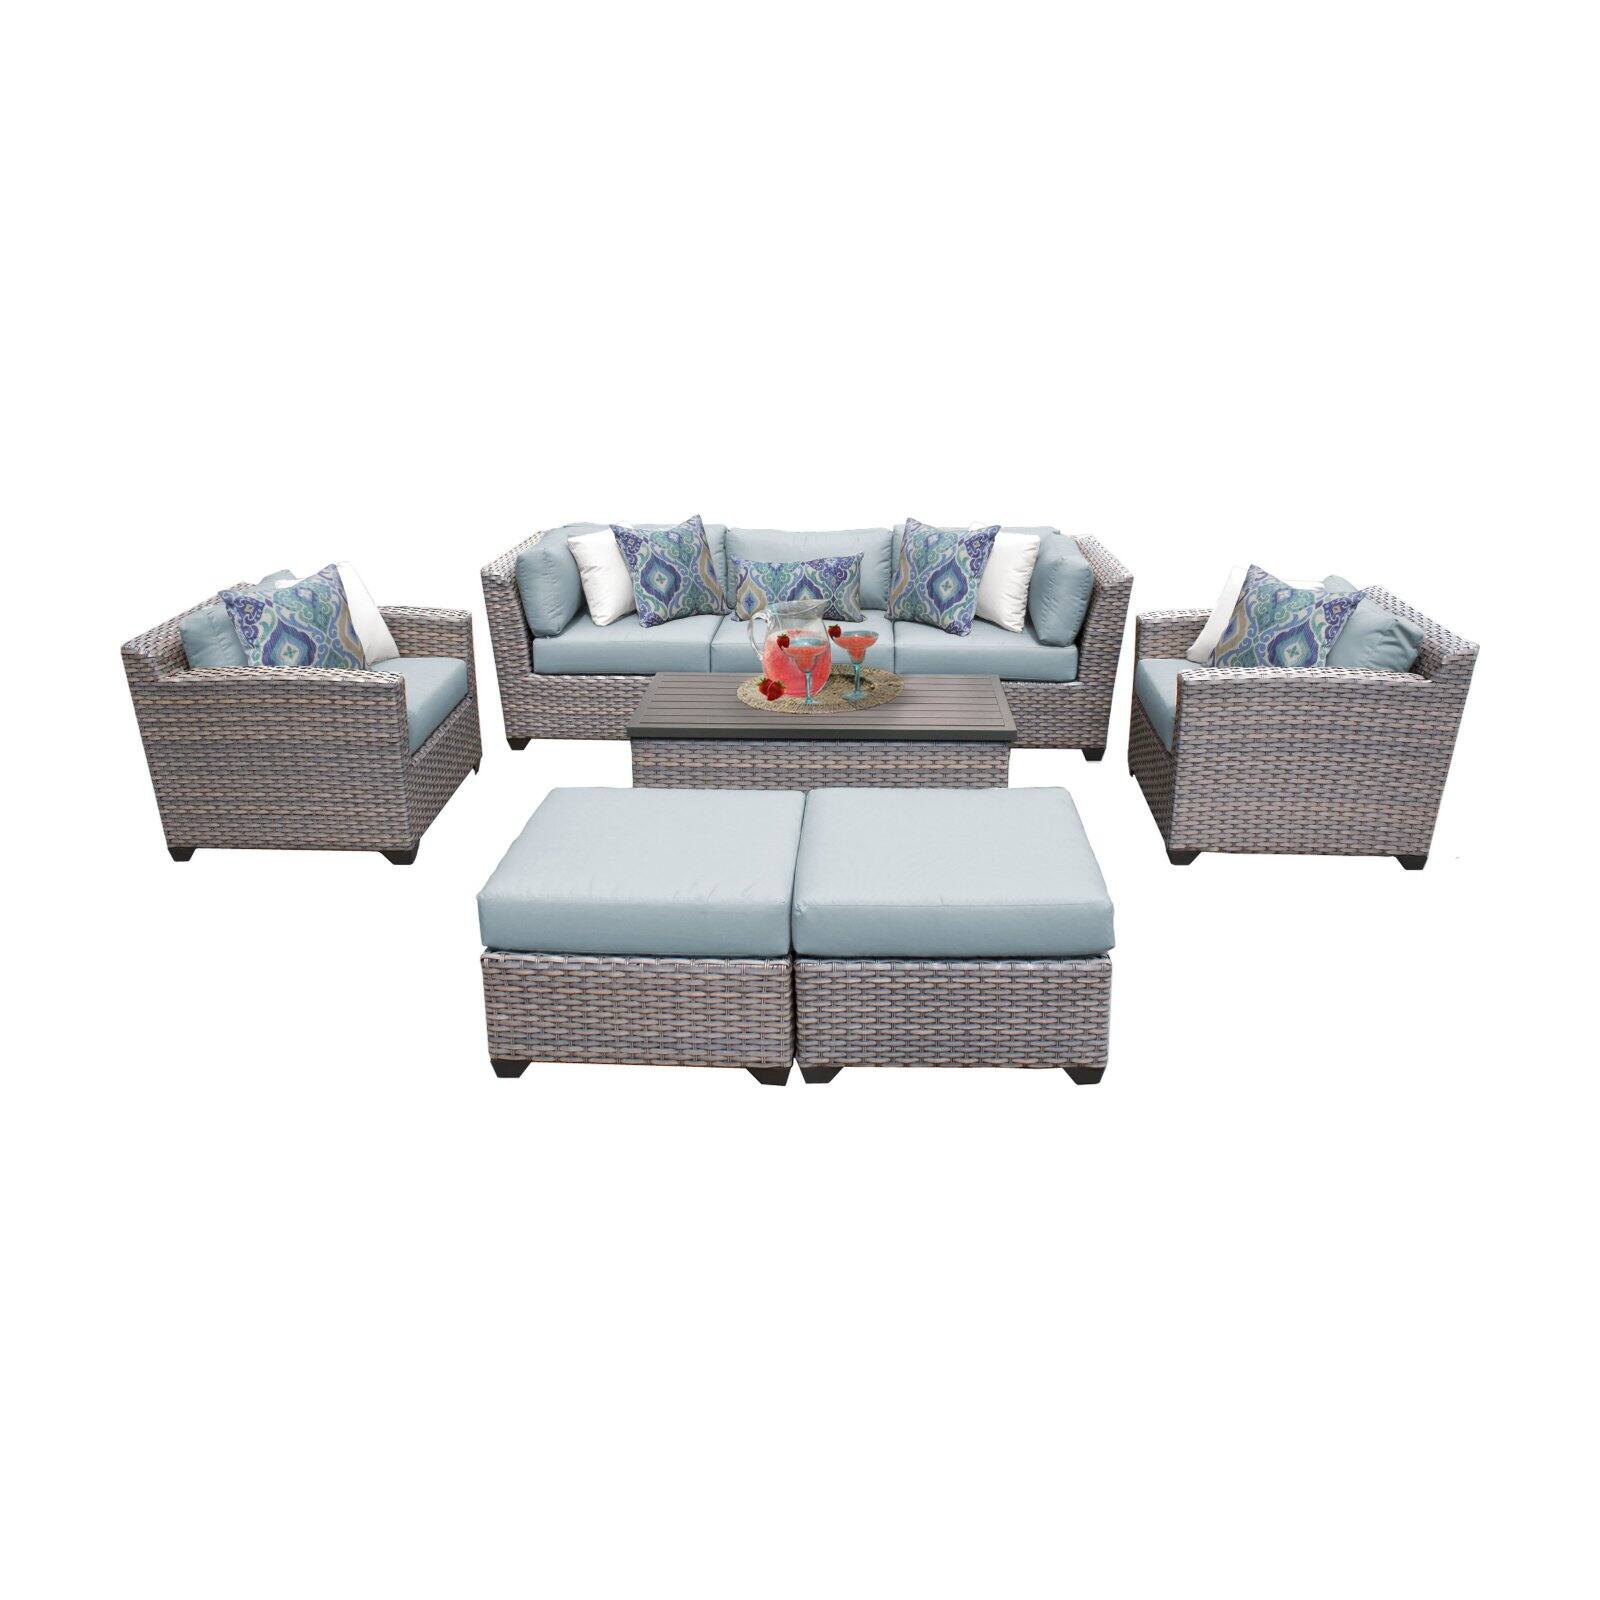 TK Classics Florence Wicker 8 Piece Patio Conversation Set with Ottoman and 2 Sets of Cushion Covers - image 2 of 2